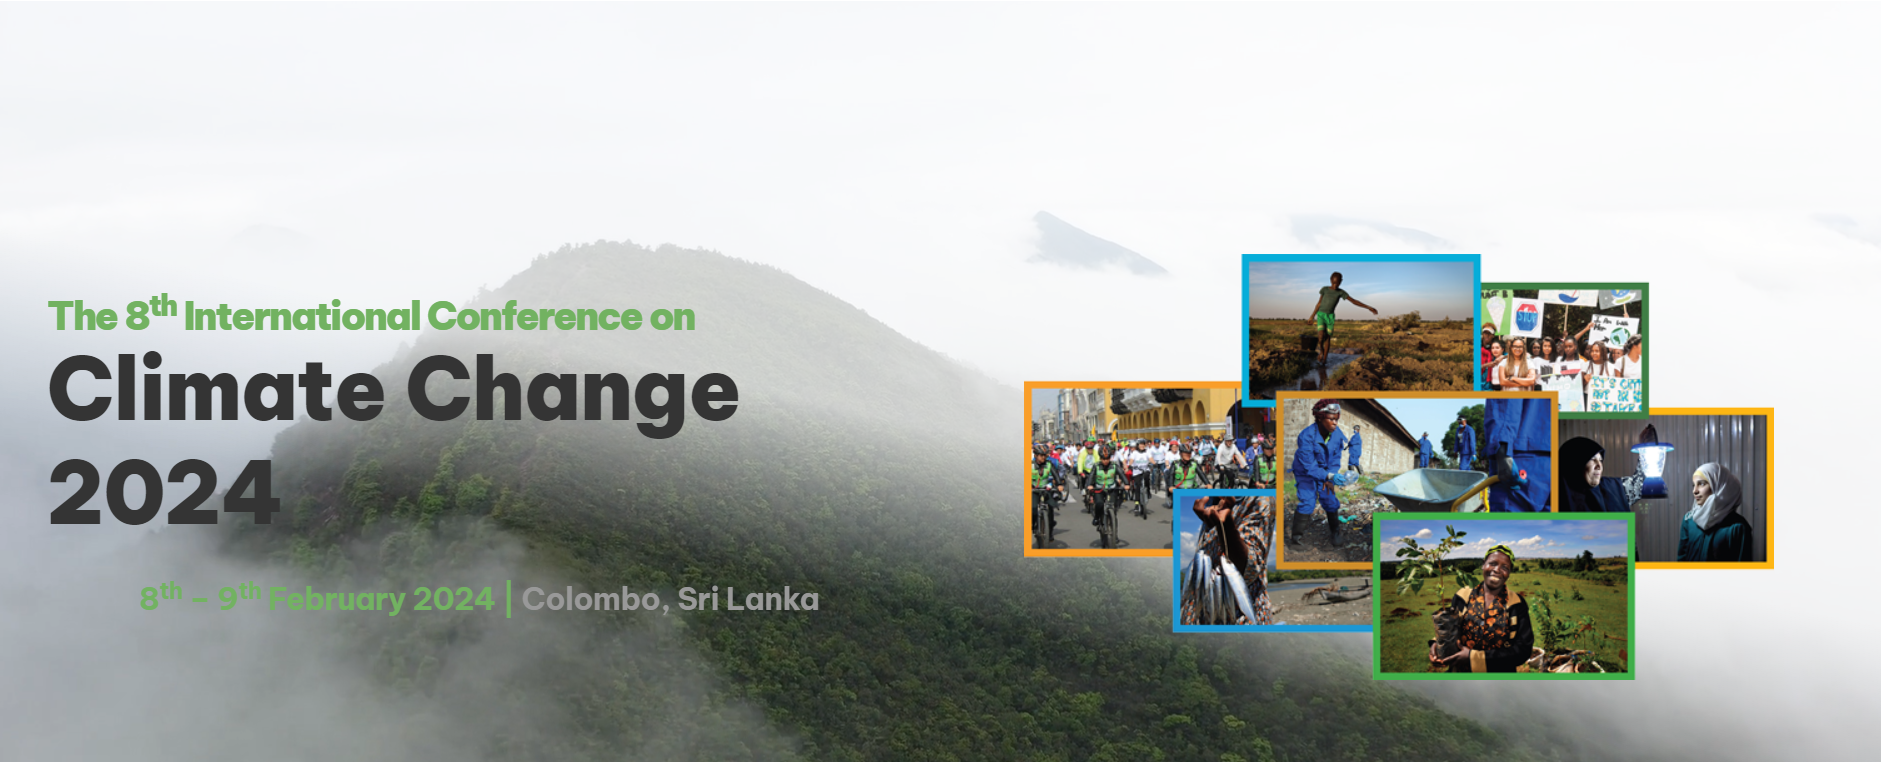 The 8th International Conference on Climate Change 2024